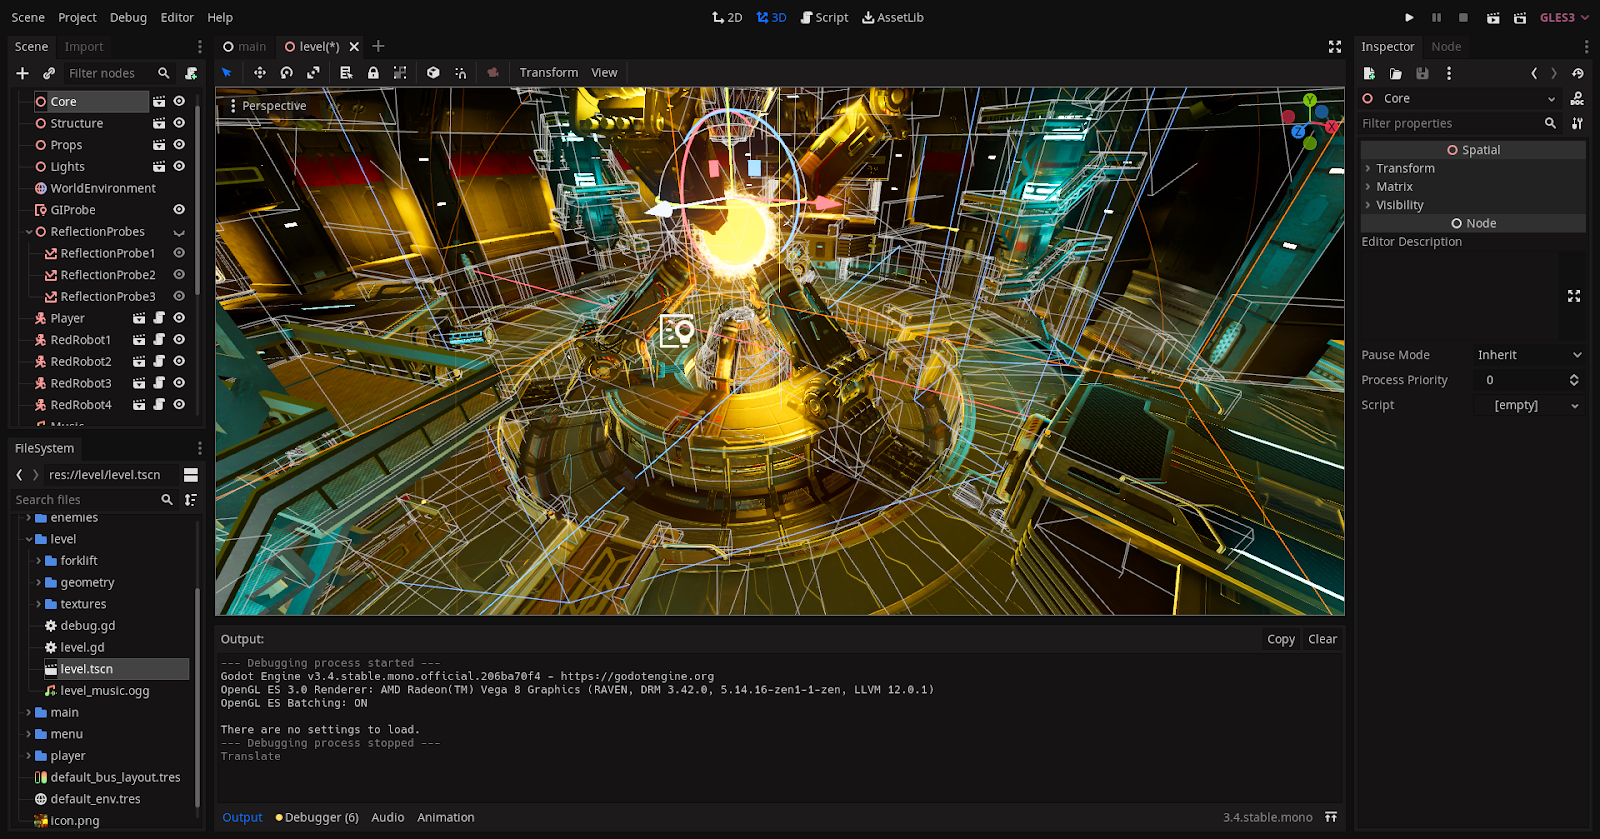 Tool interface with various windows and buttons. Wireframes of 3D objects in a sci-fi scene are shown. 